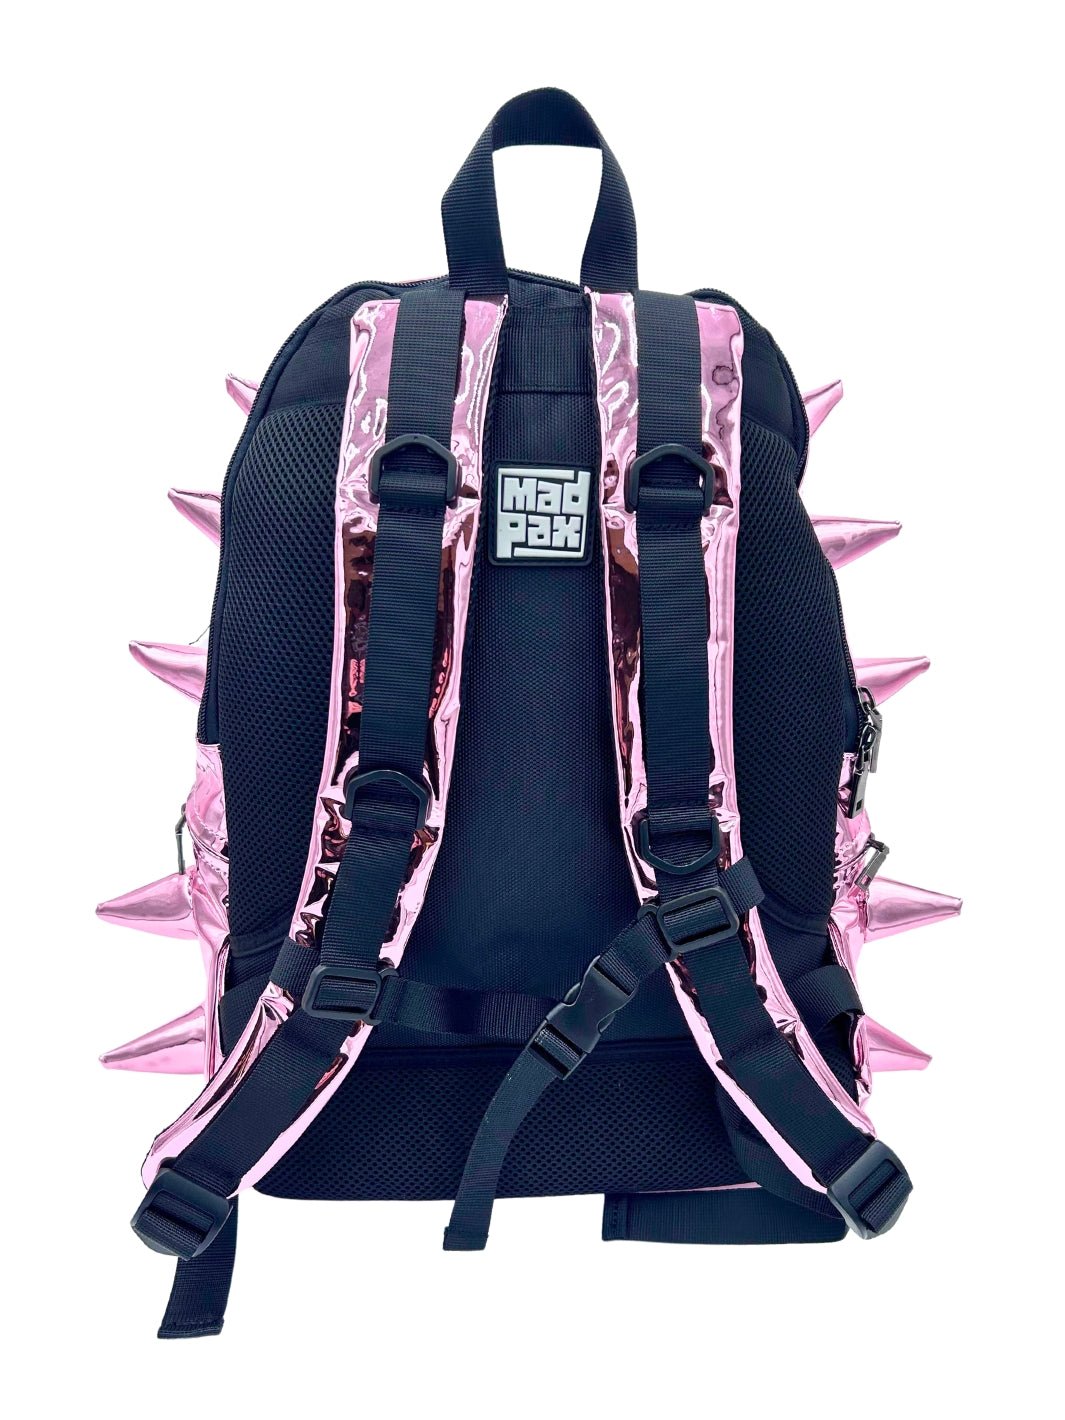 Back view of metallic pink bookbag with spikes by Madpax